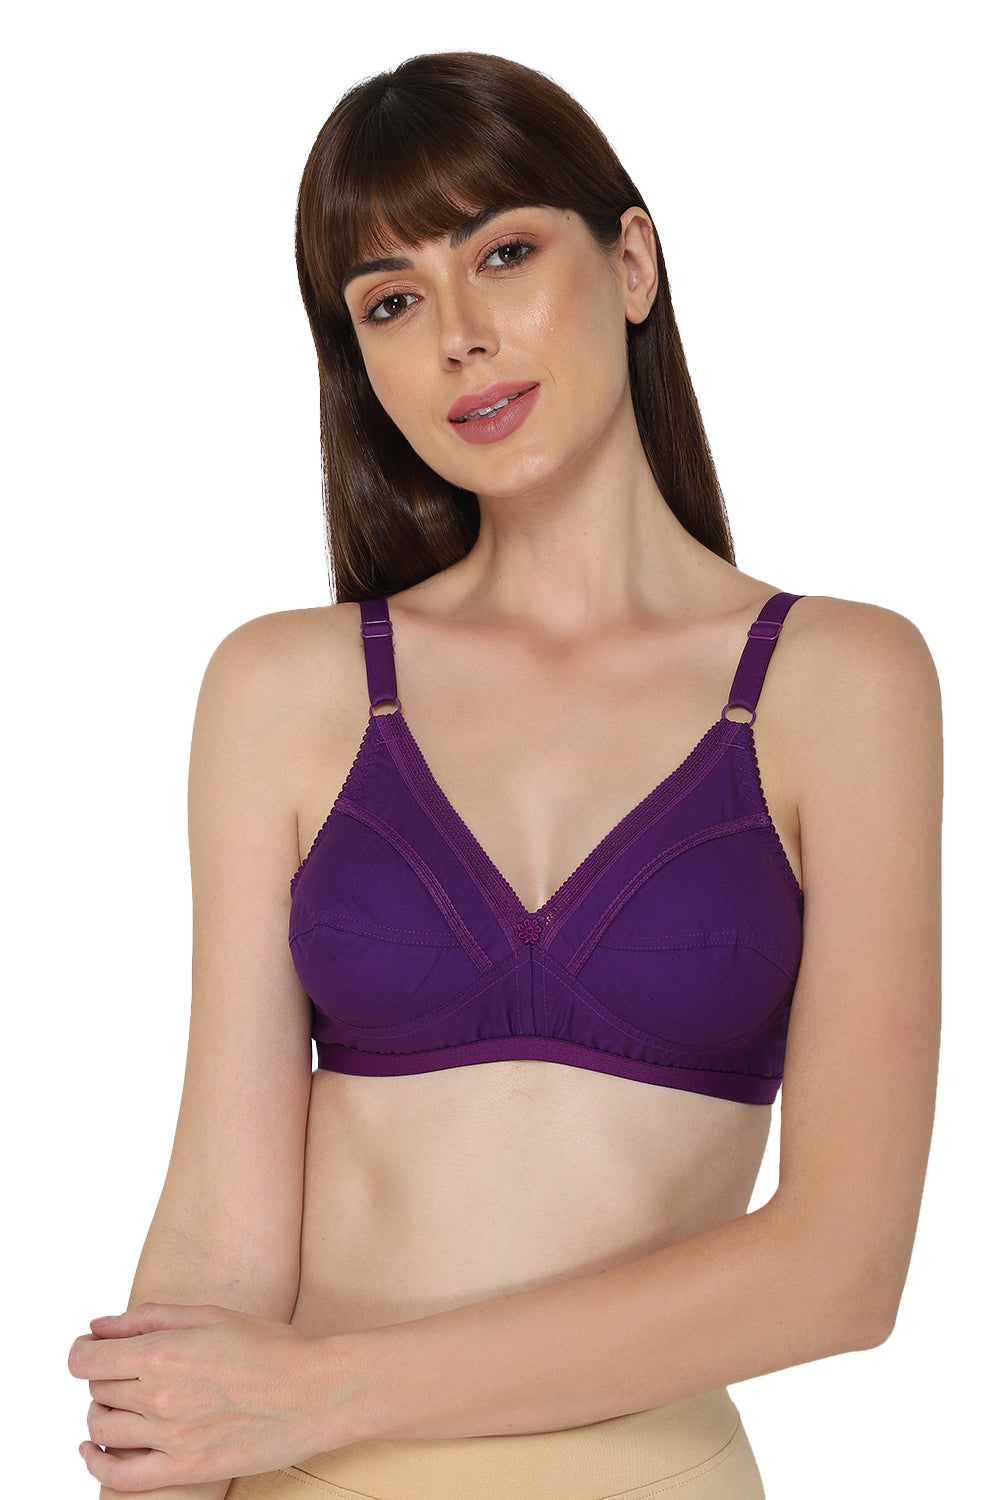 Naidu Hall Heritage-Bra Special Combo Pack - Naturalle - C34